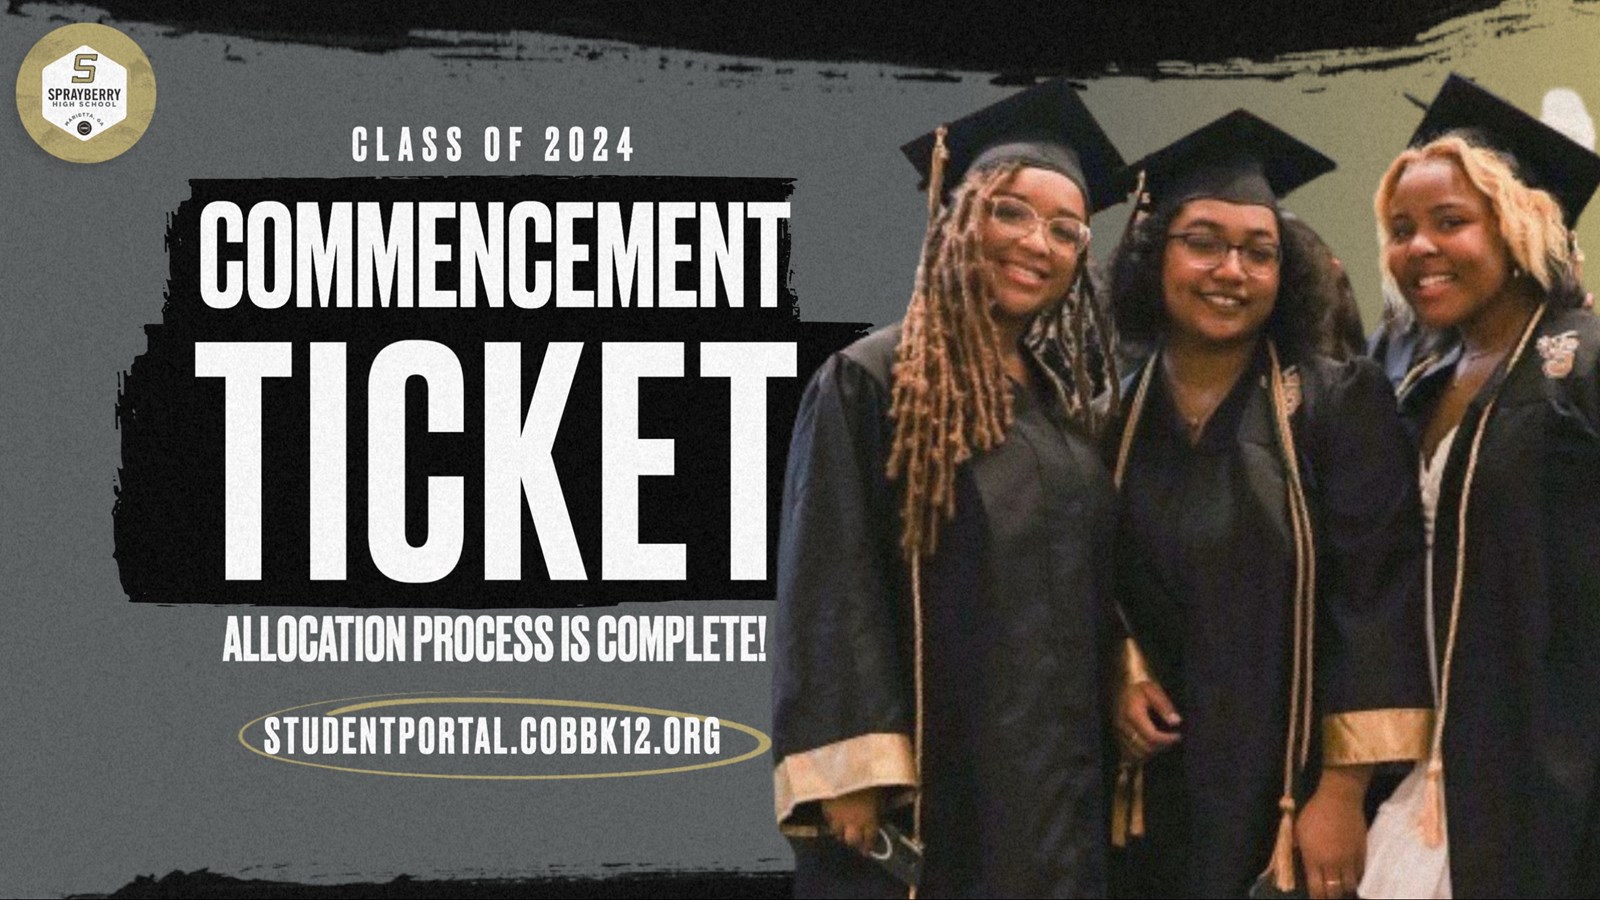 Commencement Ticket Allocation Process Complete | Class of 2024 | Sprayberry High School